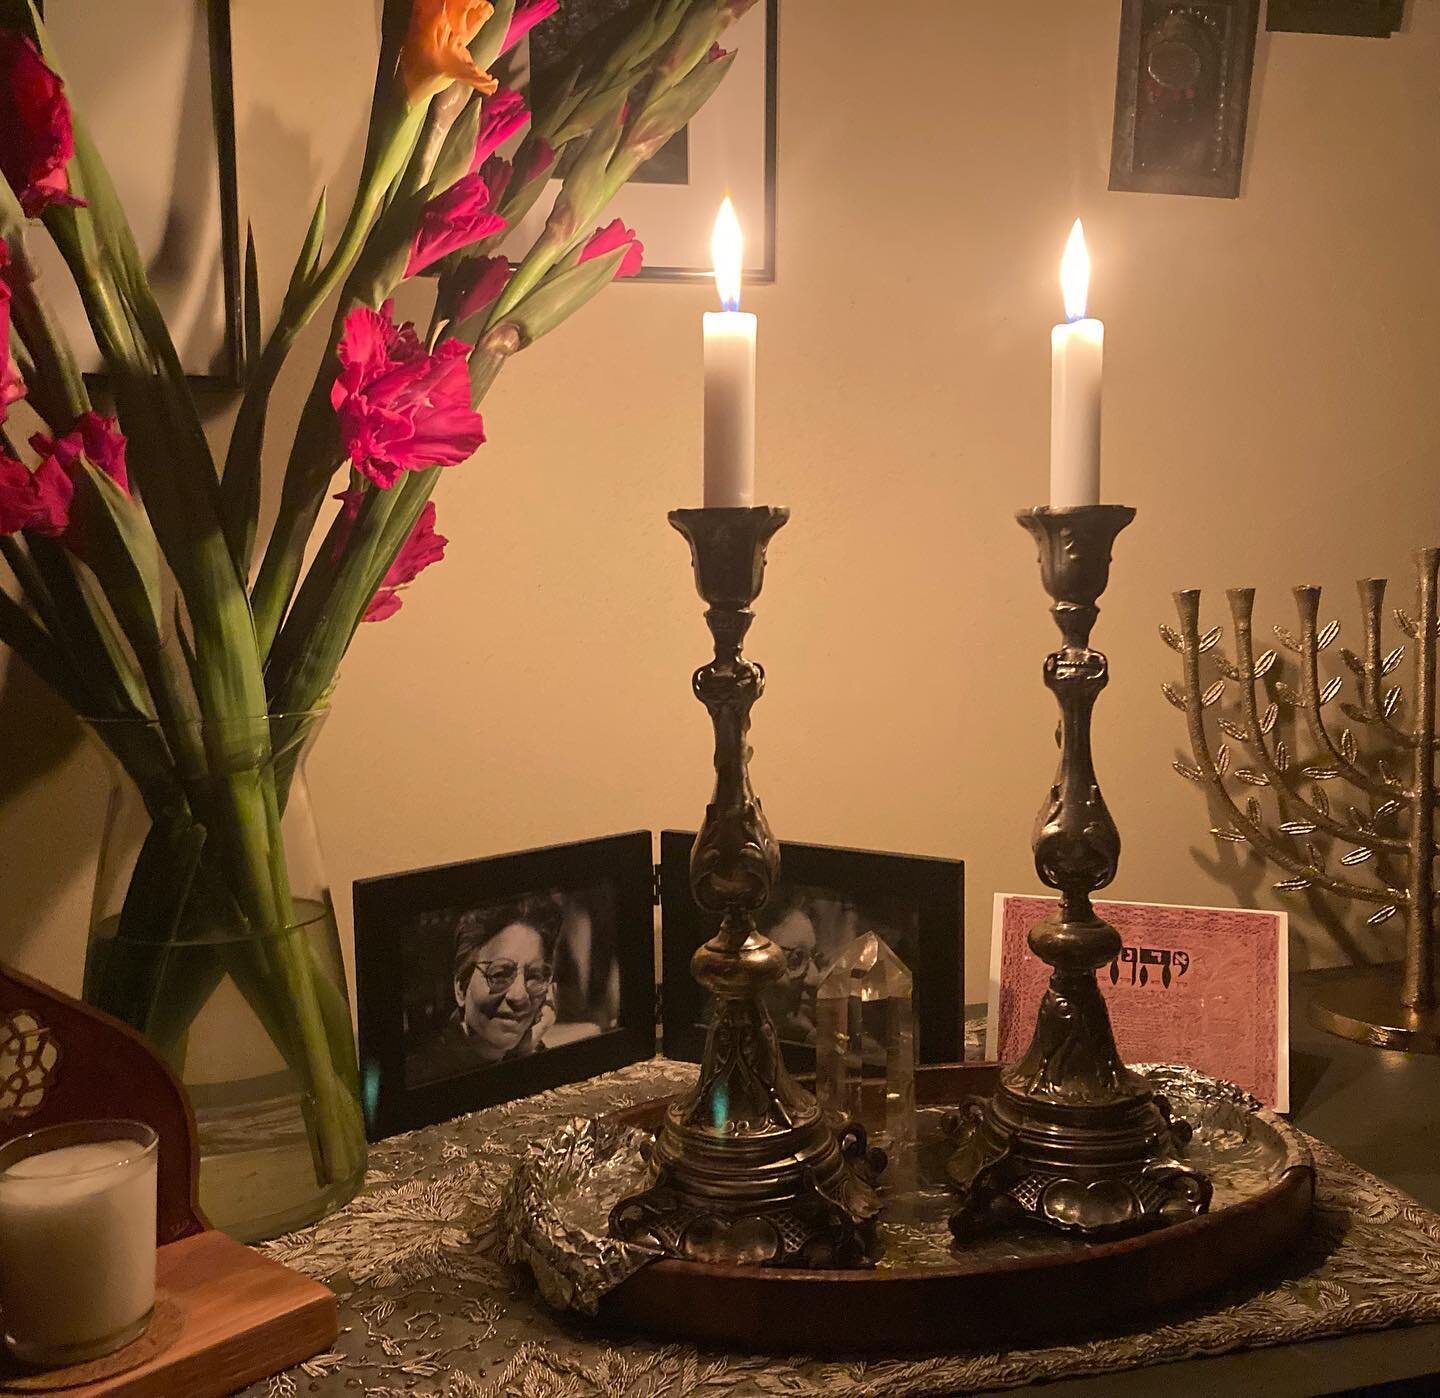 This Shabbat, the new moon of Elul, I am marking the 10th yahrzeit (anniversary) of my sister Shulamith&rsquo;s death. Shocking how time is flowing by, and how the world is changing!

As one of the founders of the radical feminist movement, Shulamith